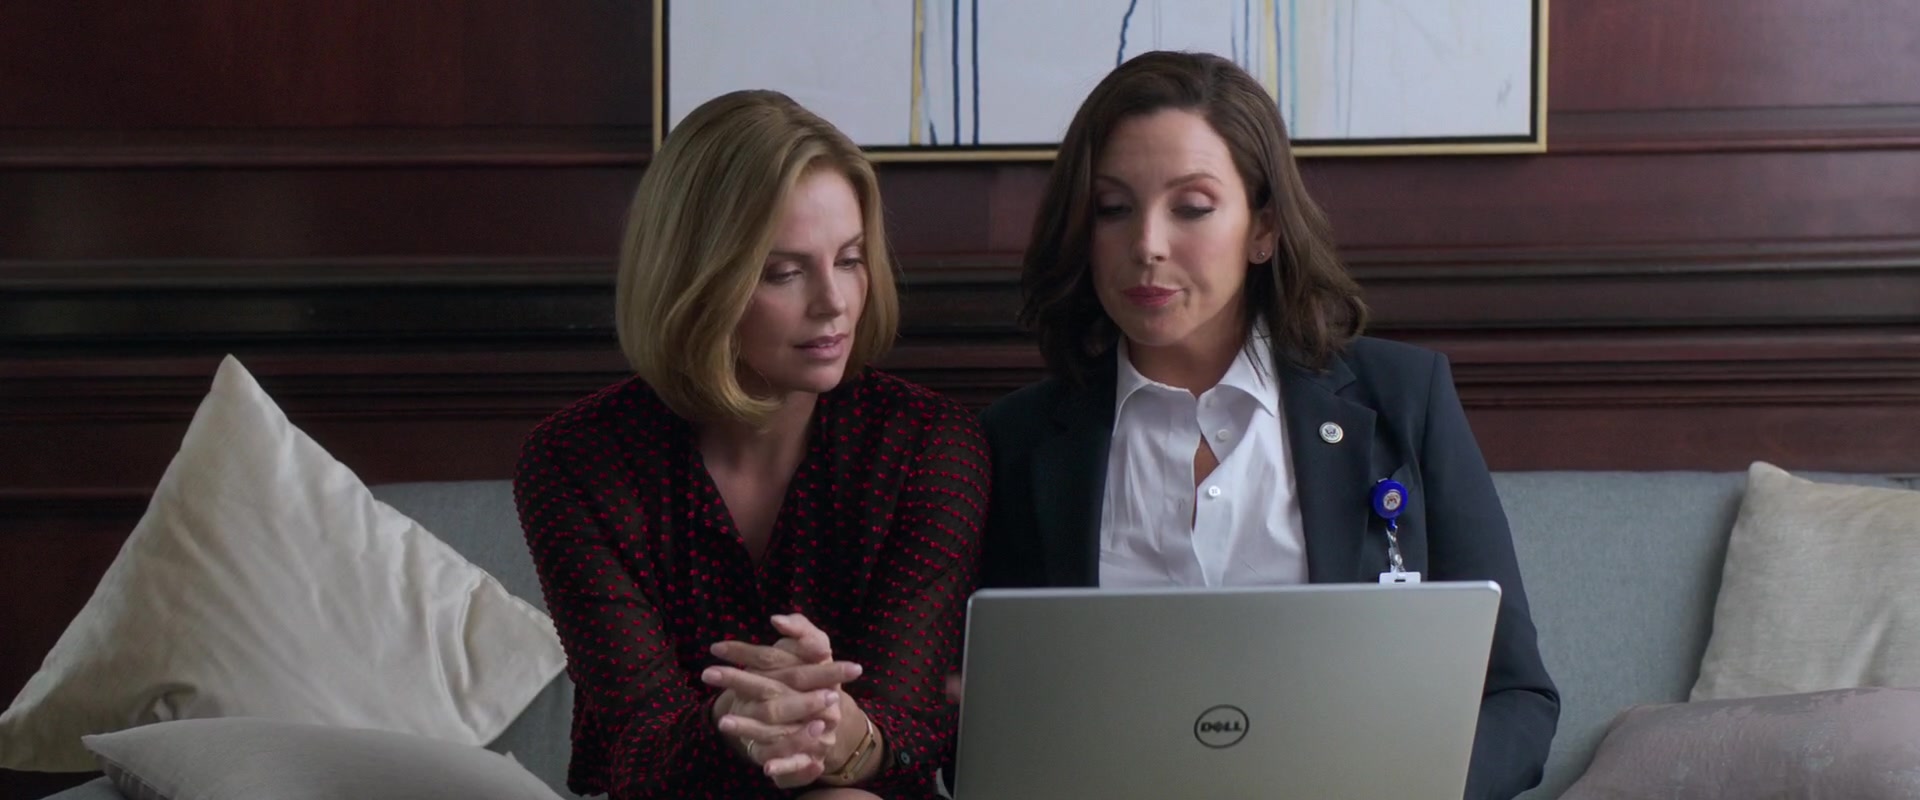 February 18, I analyzed a Movie and product placement was spotted: Dell Not...